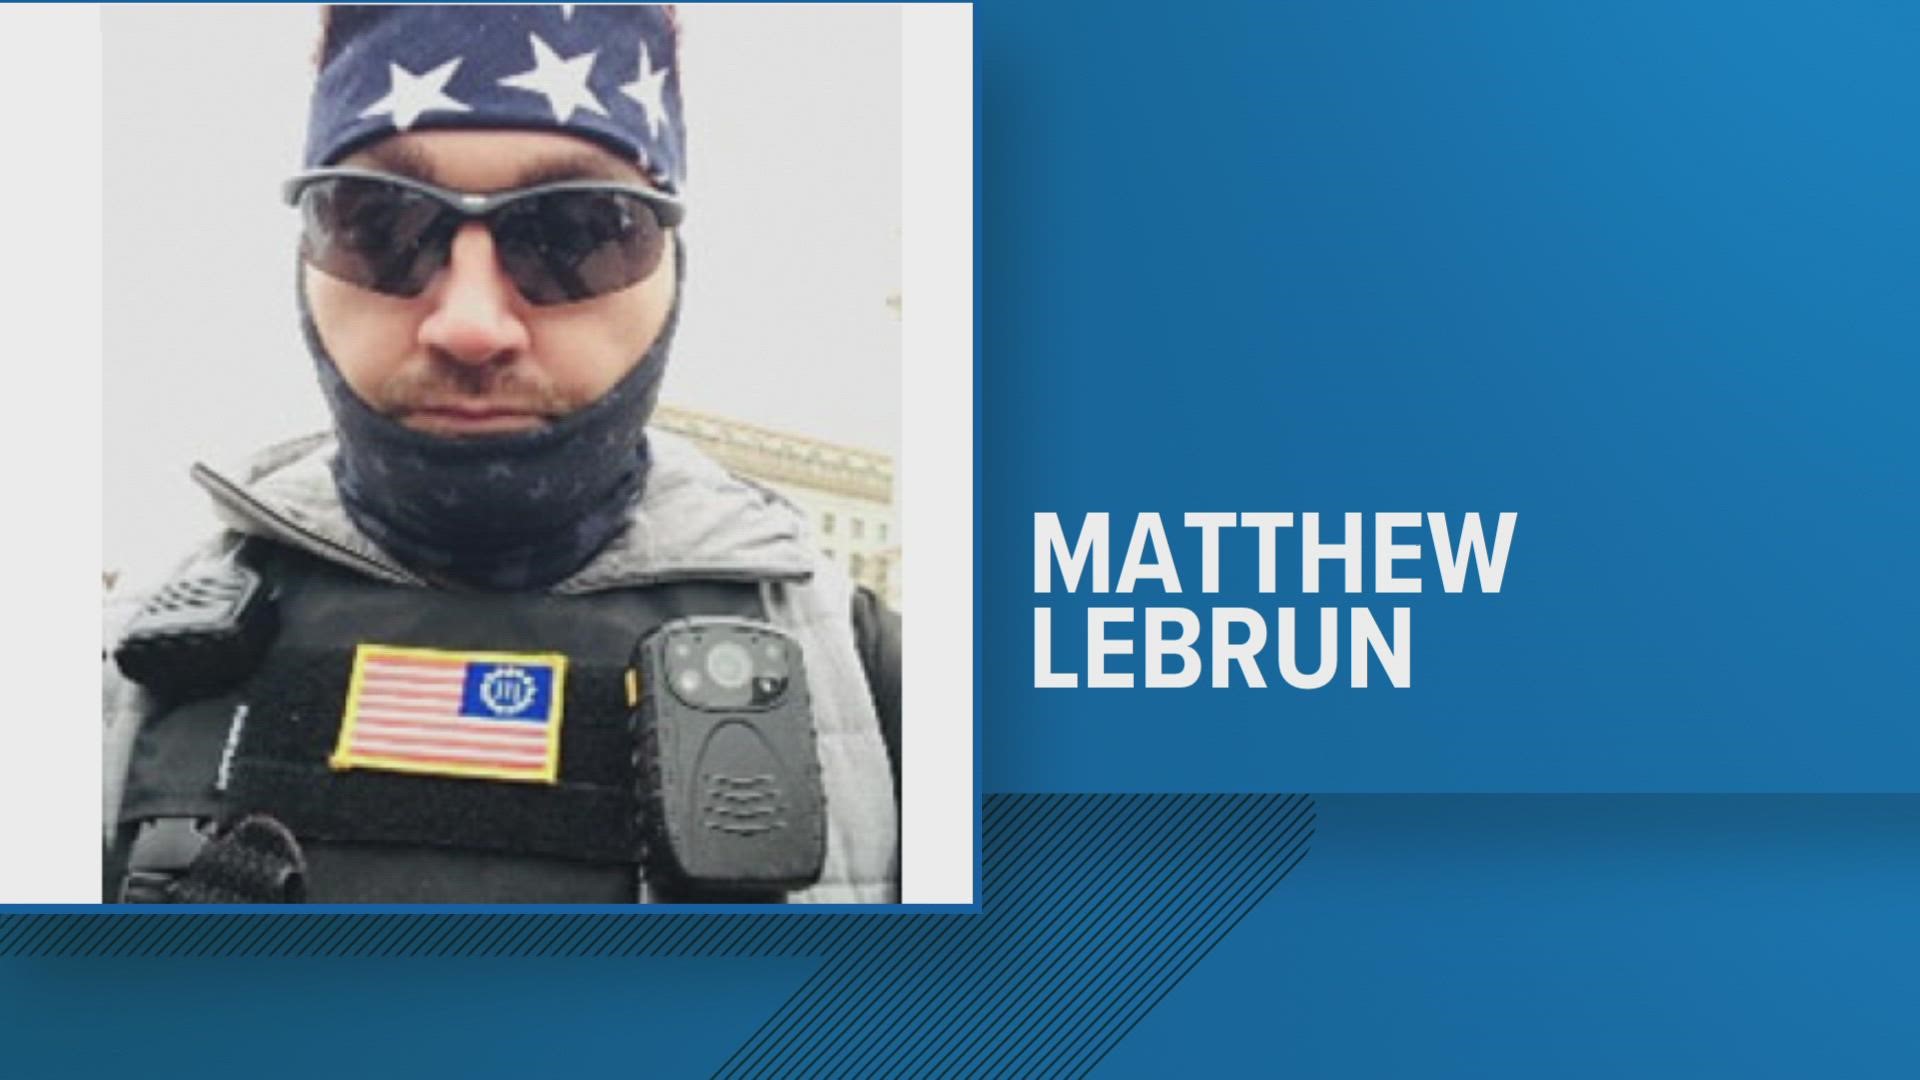 33-year-old Matthew LeBrun is facing several charges including unlawfully entering the building.